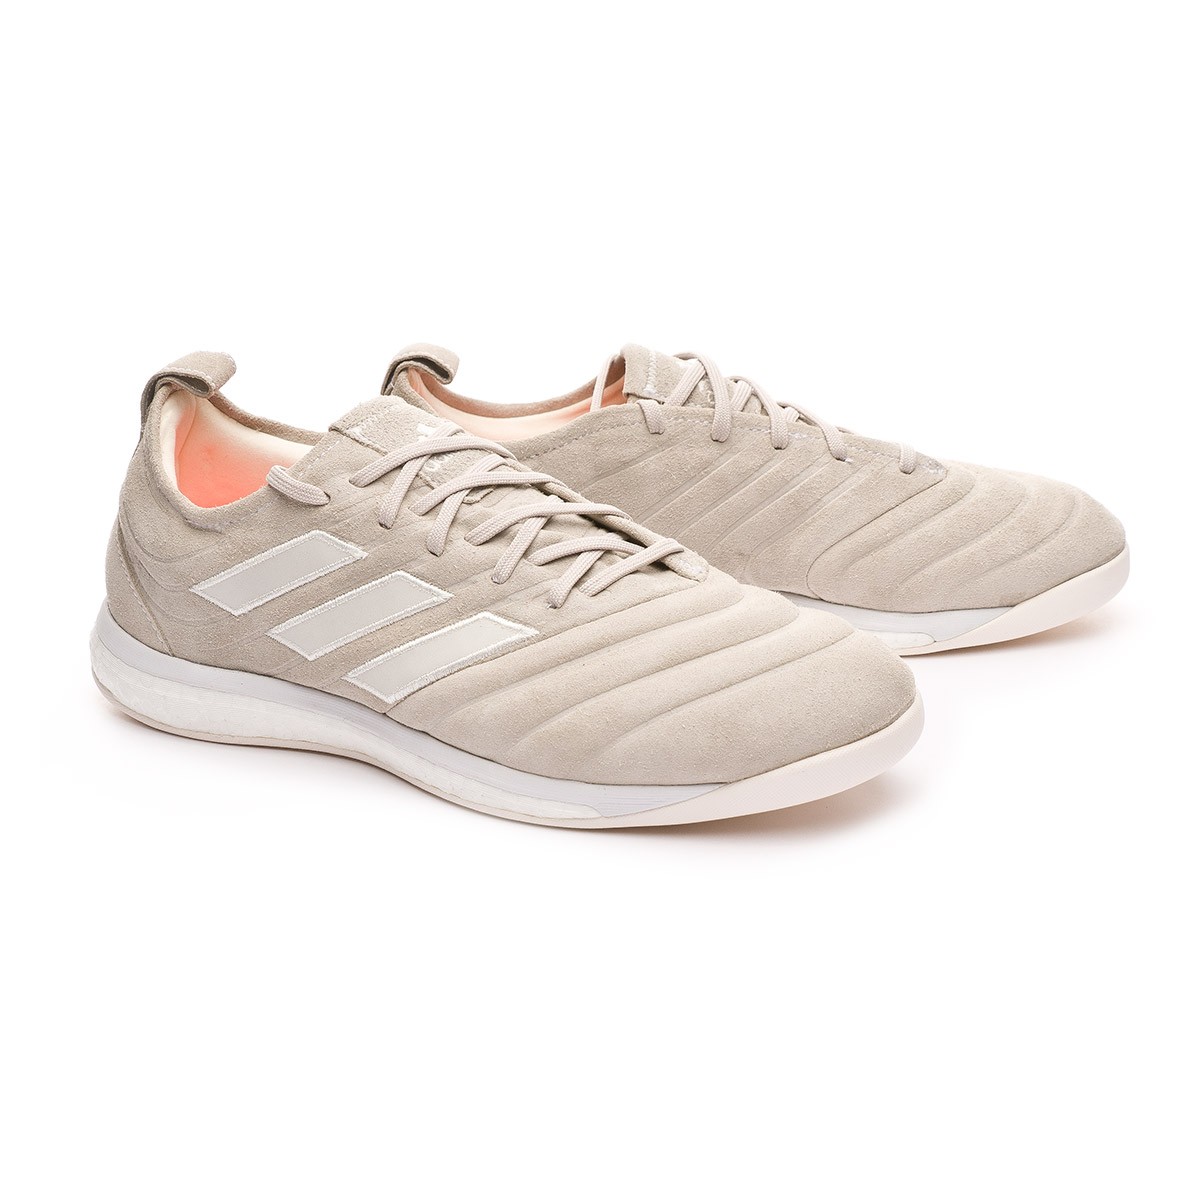 adidas copa trainers